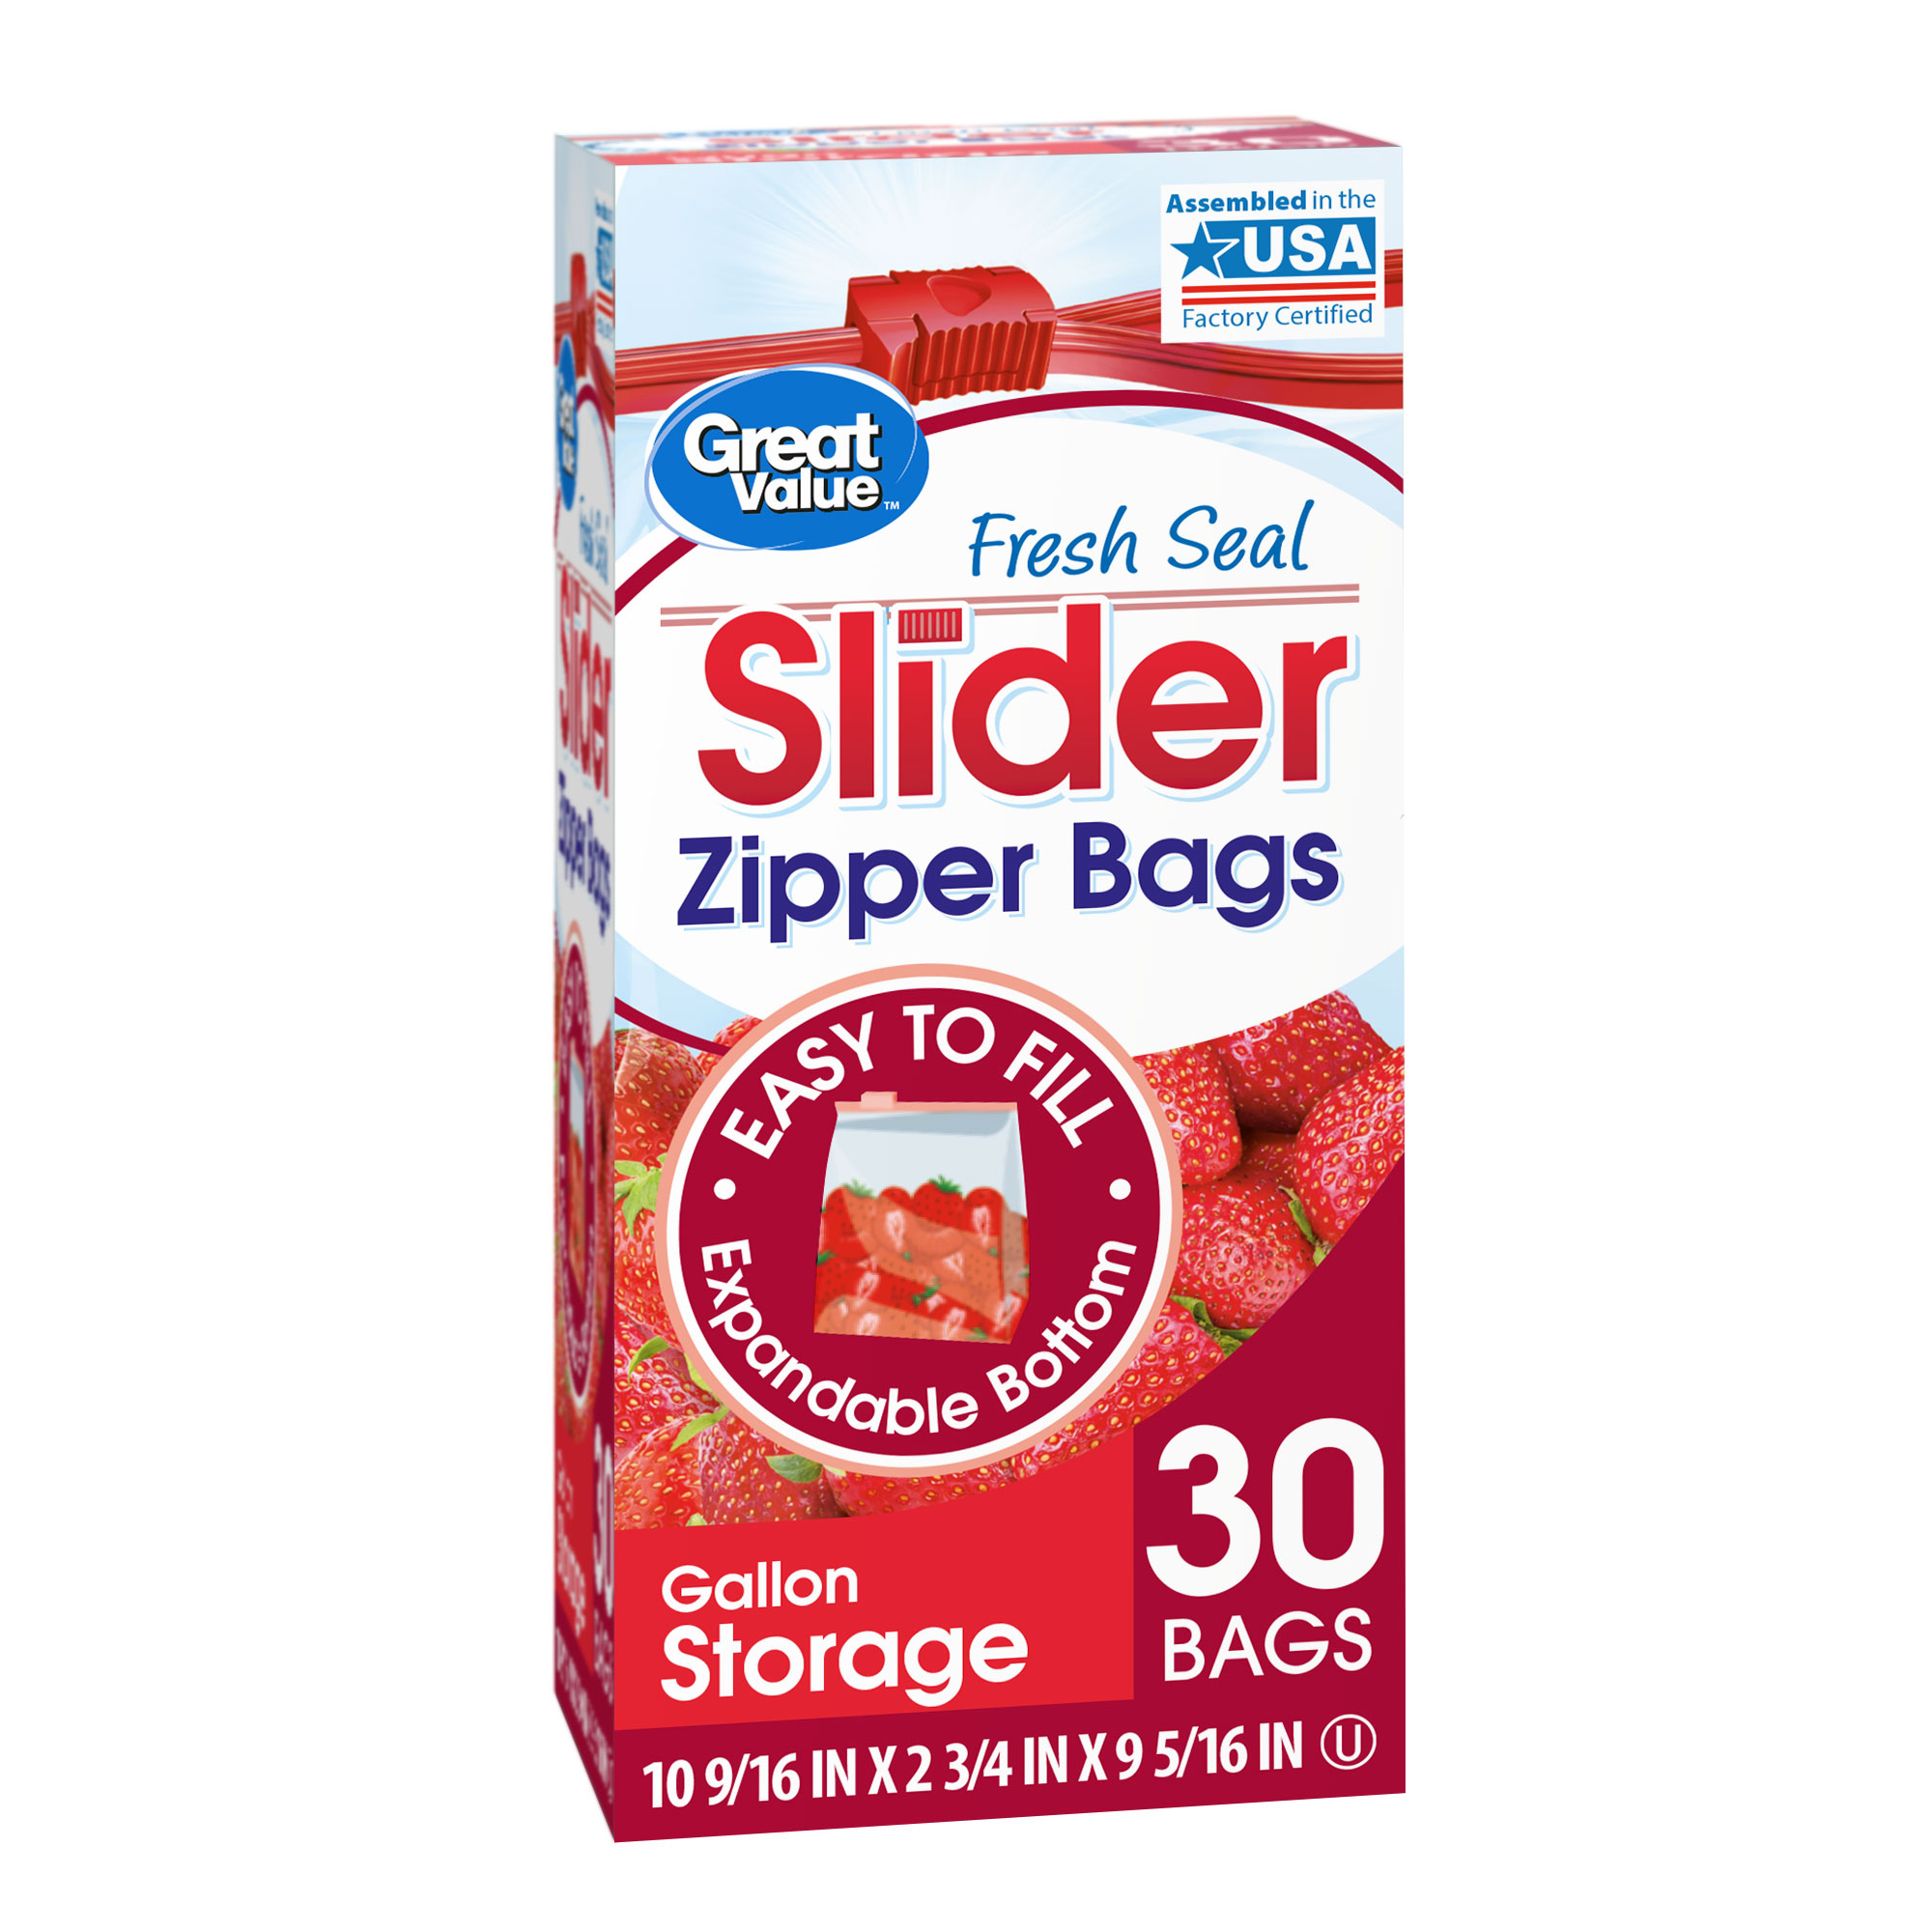 Great Value Fresh Seal Slider Zipper Gallon Storage Bags, 30 Count - image 1 of 8